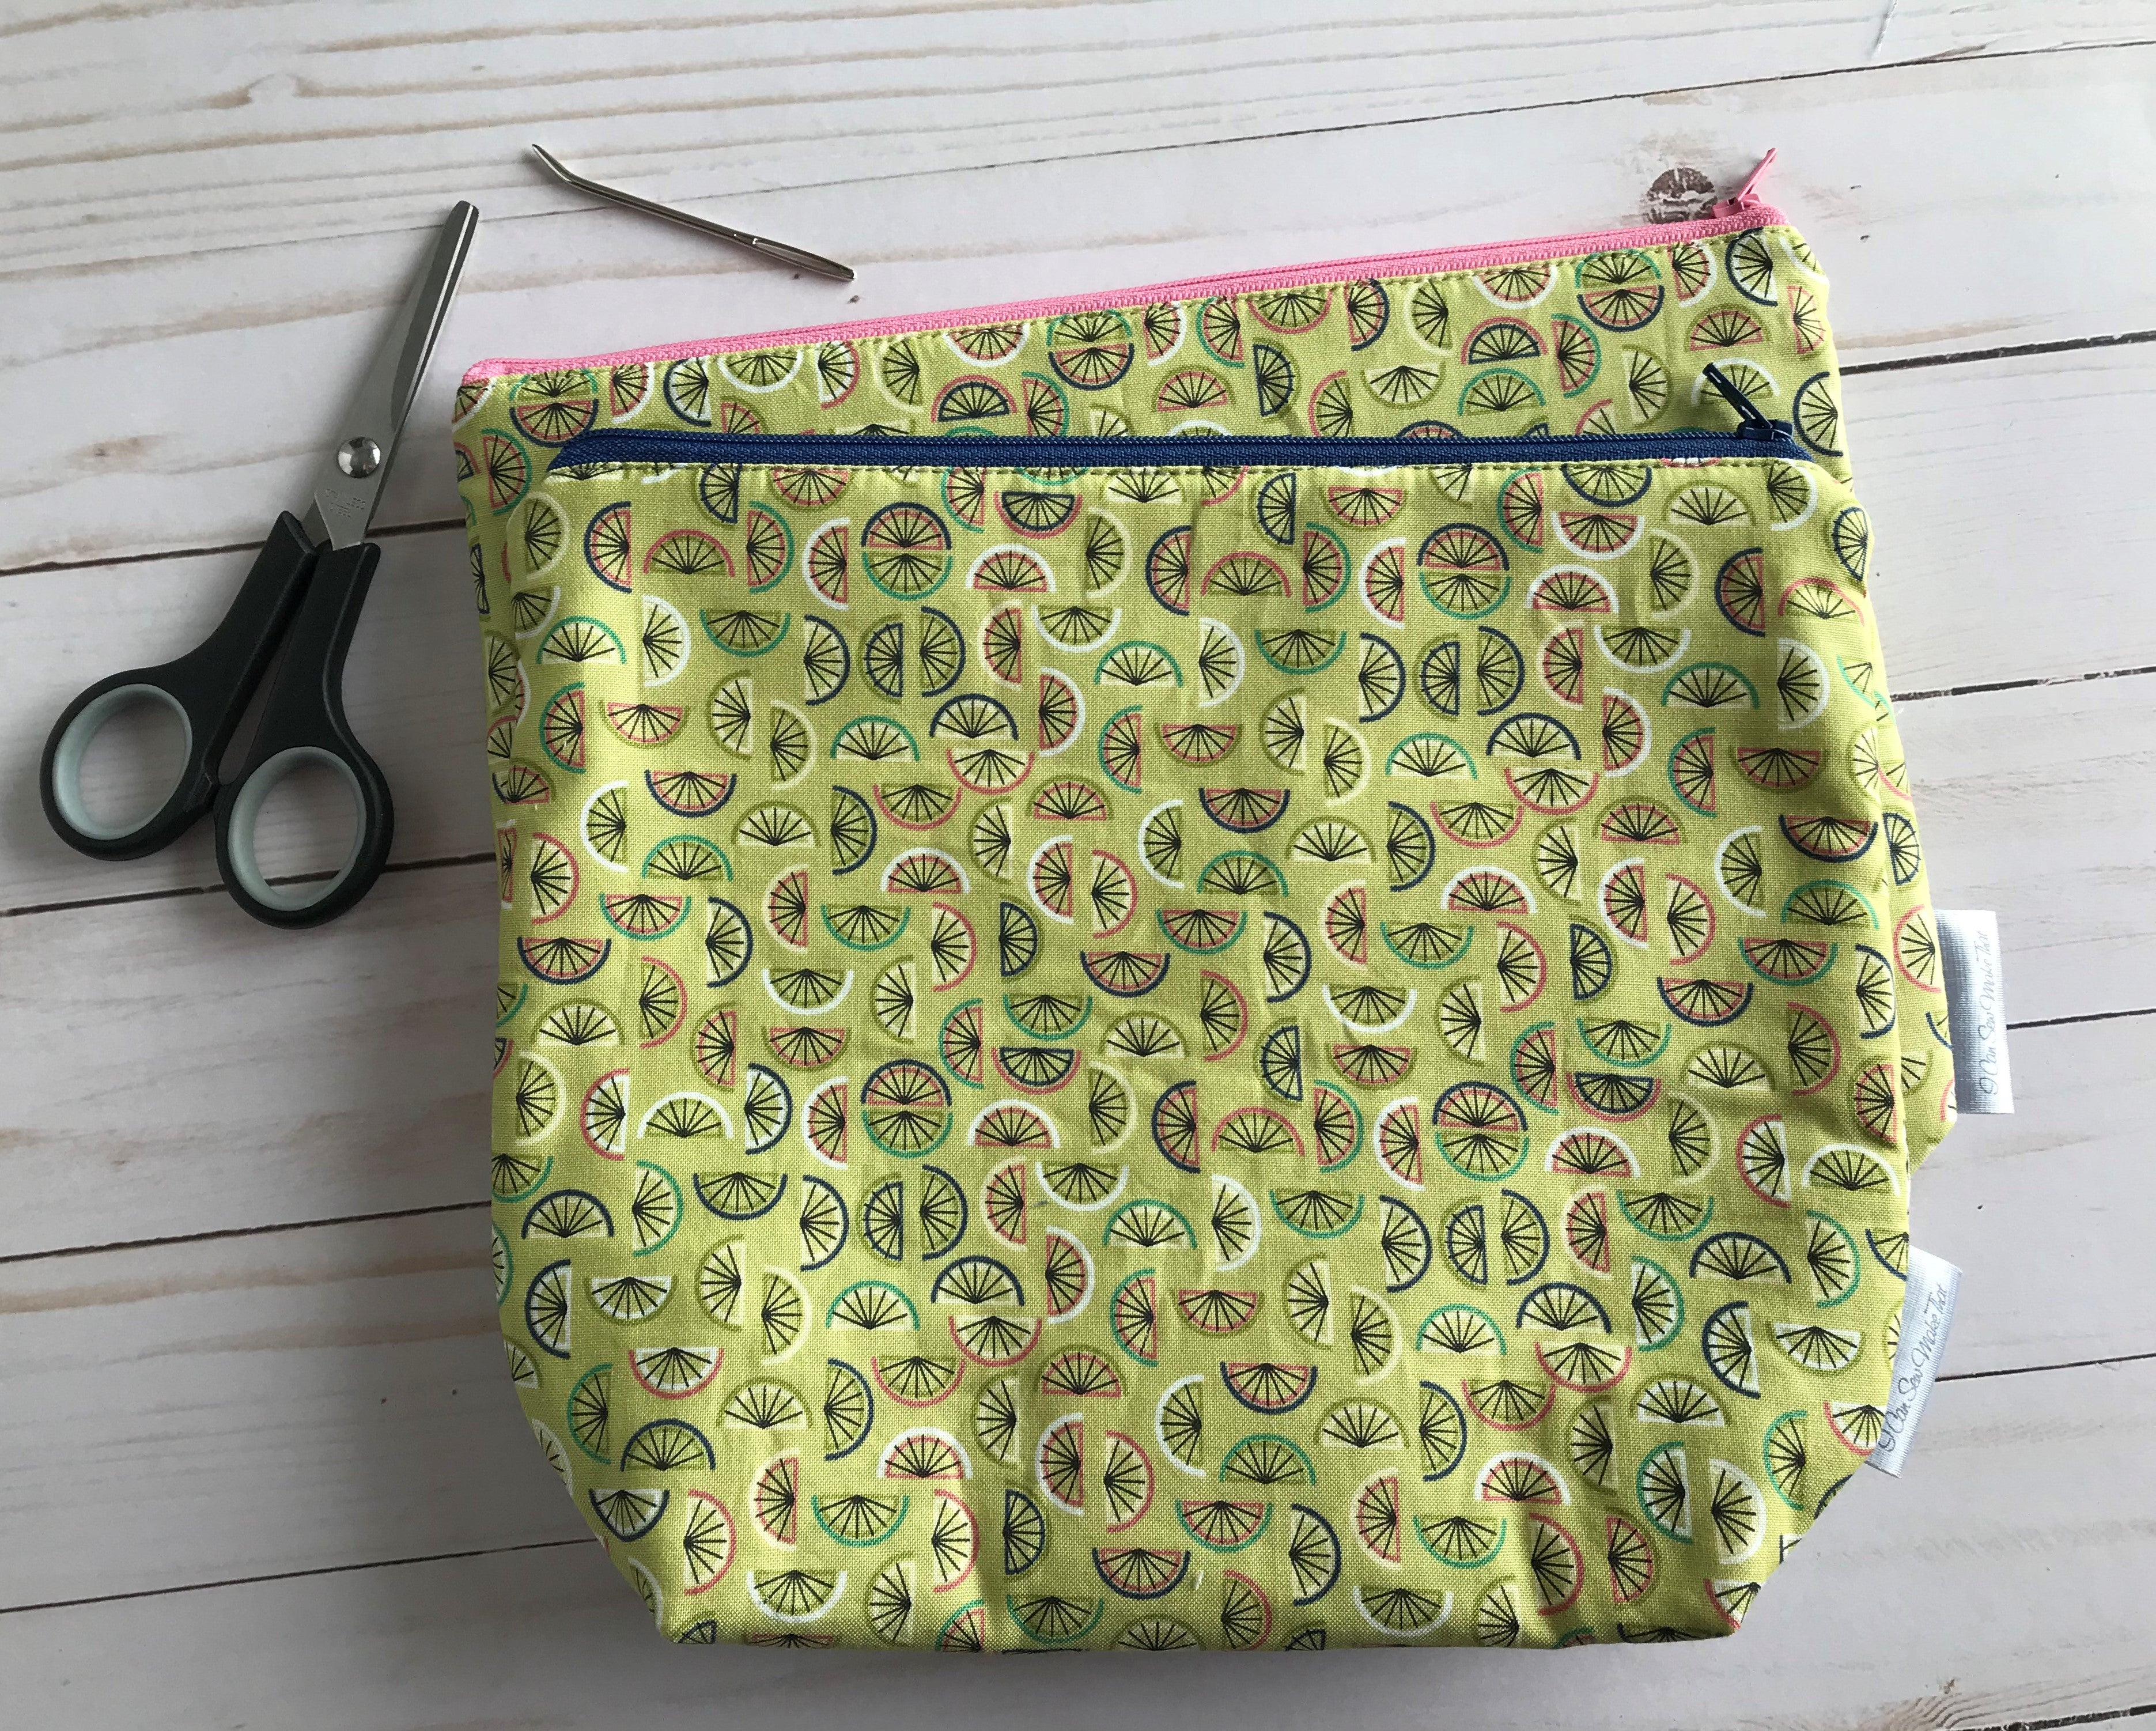 Sock Project Bag - Green with citrus